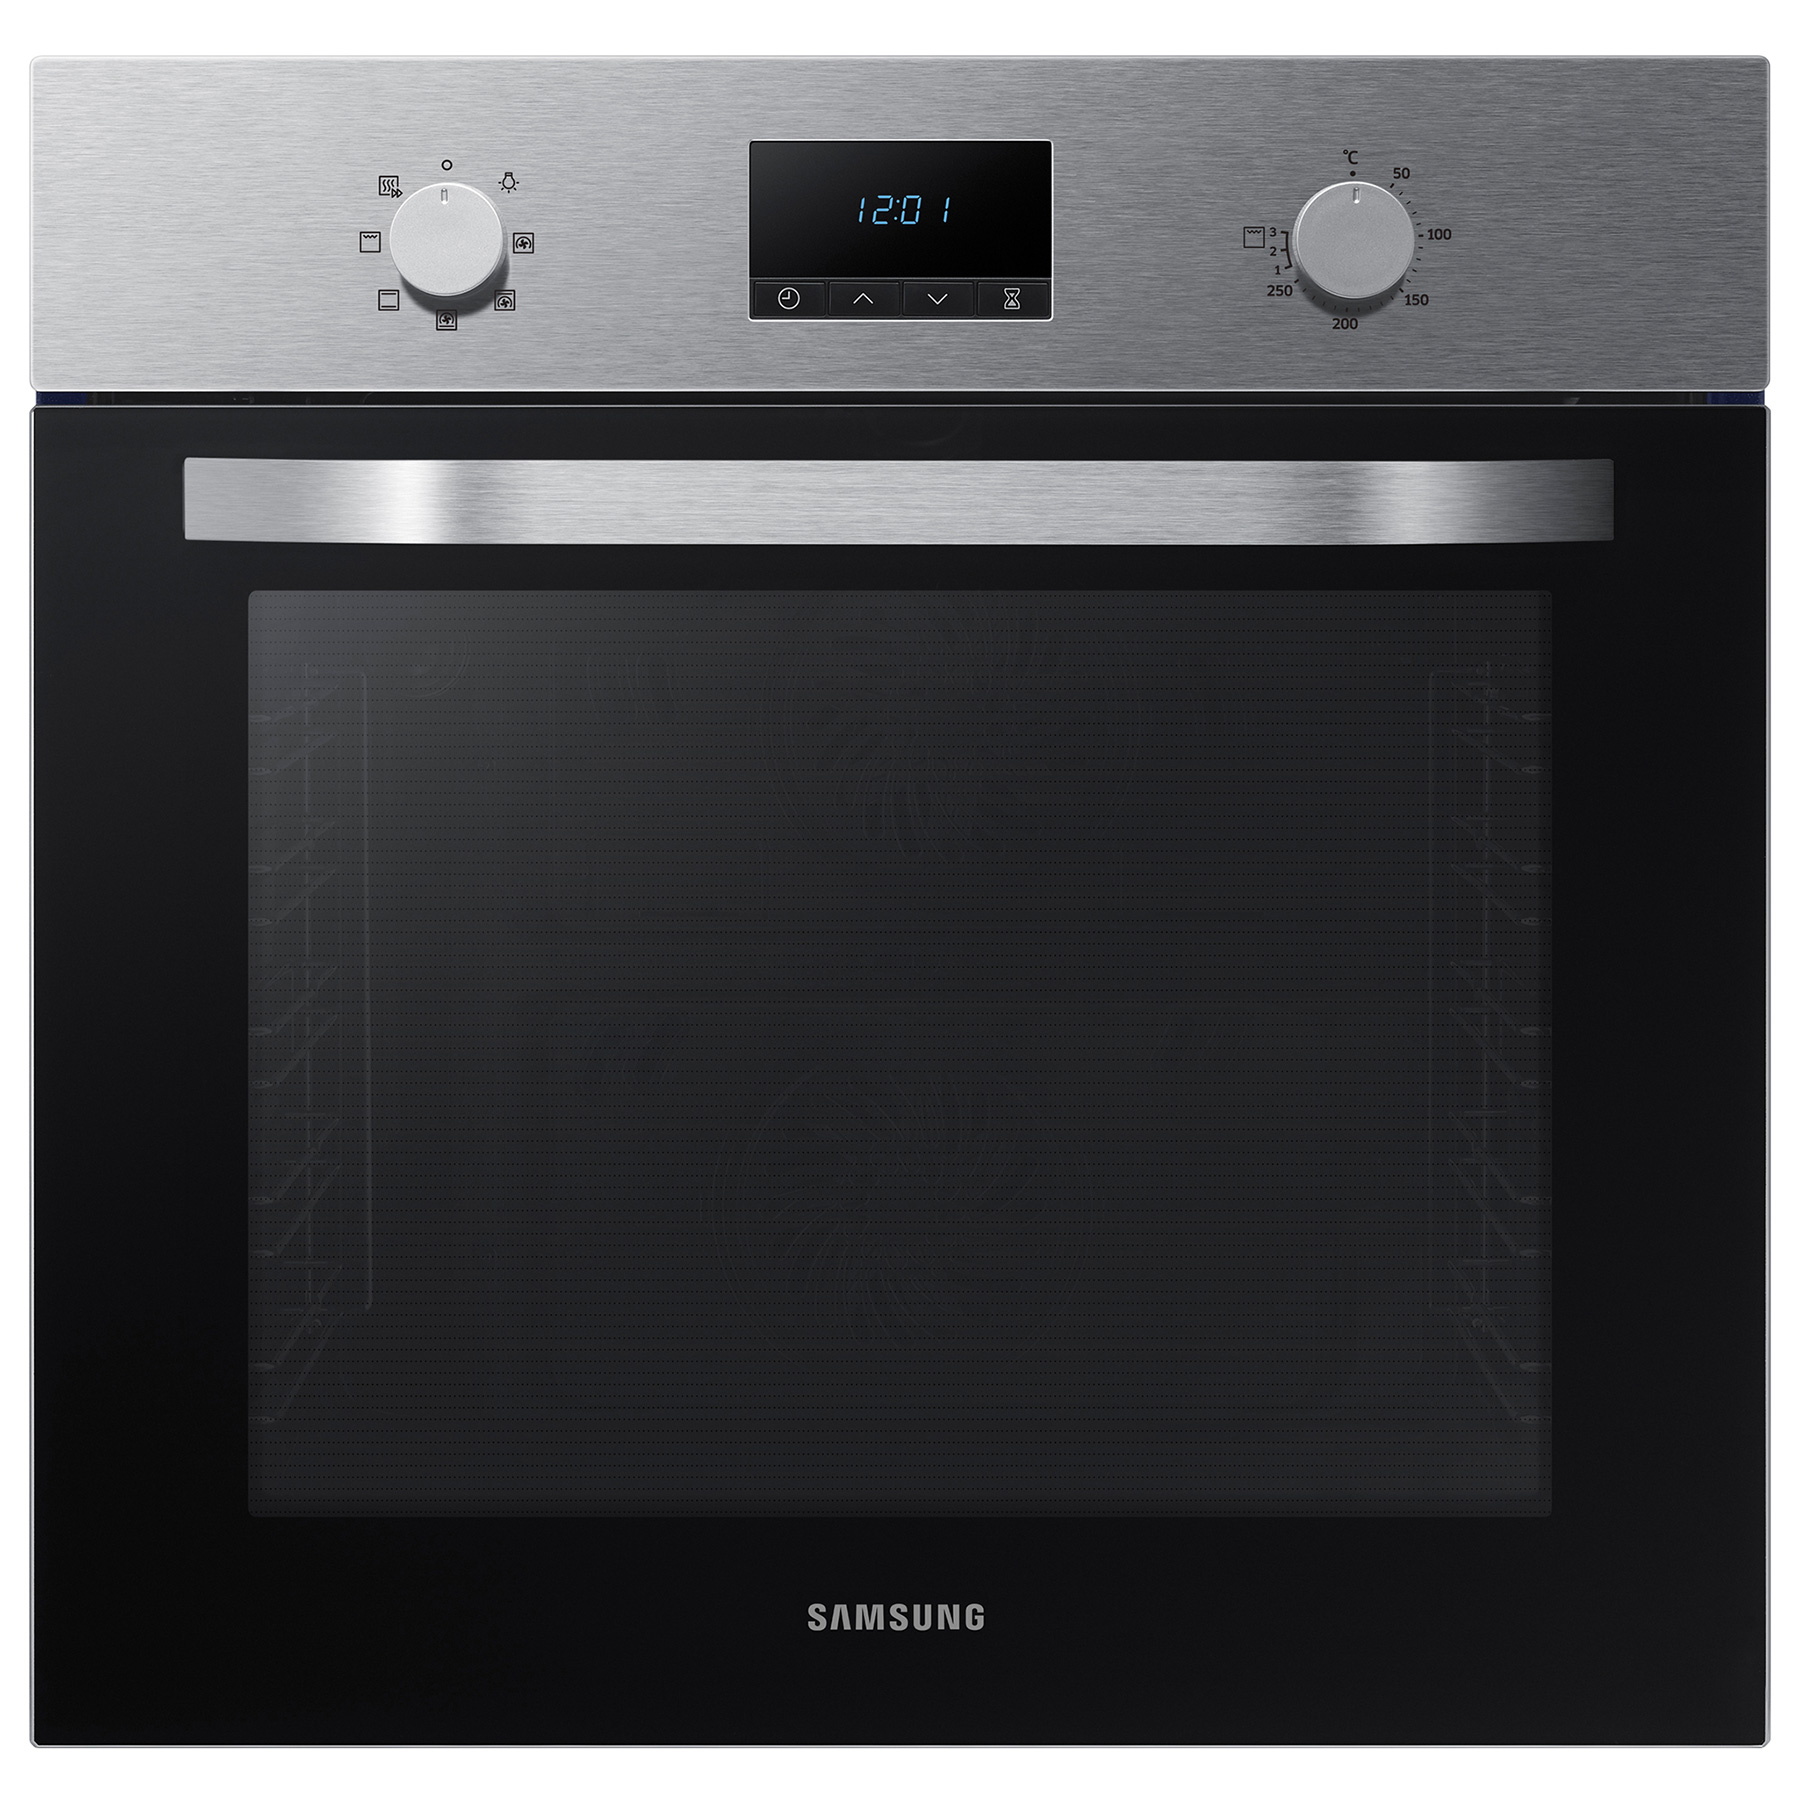 Samsung NV70K1310BS Built In Electric Multifunction Oven in St Steel 6